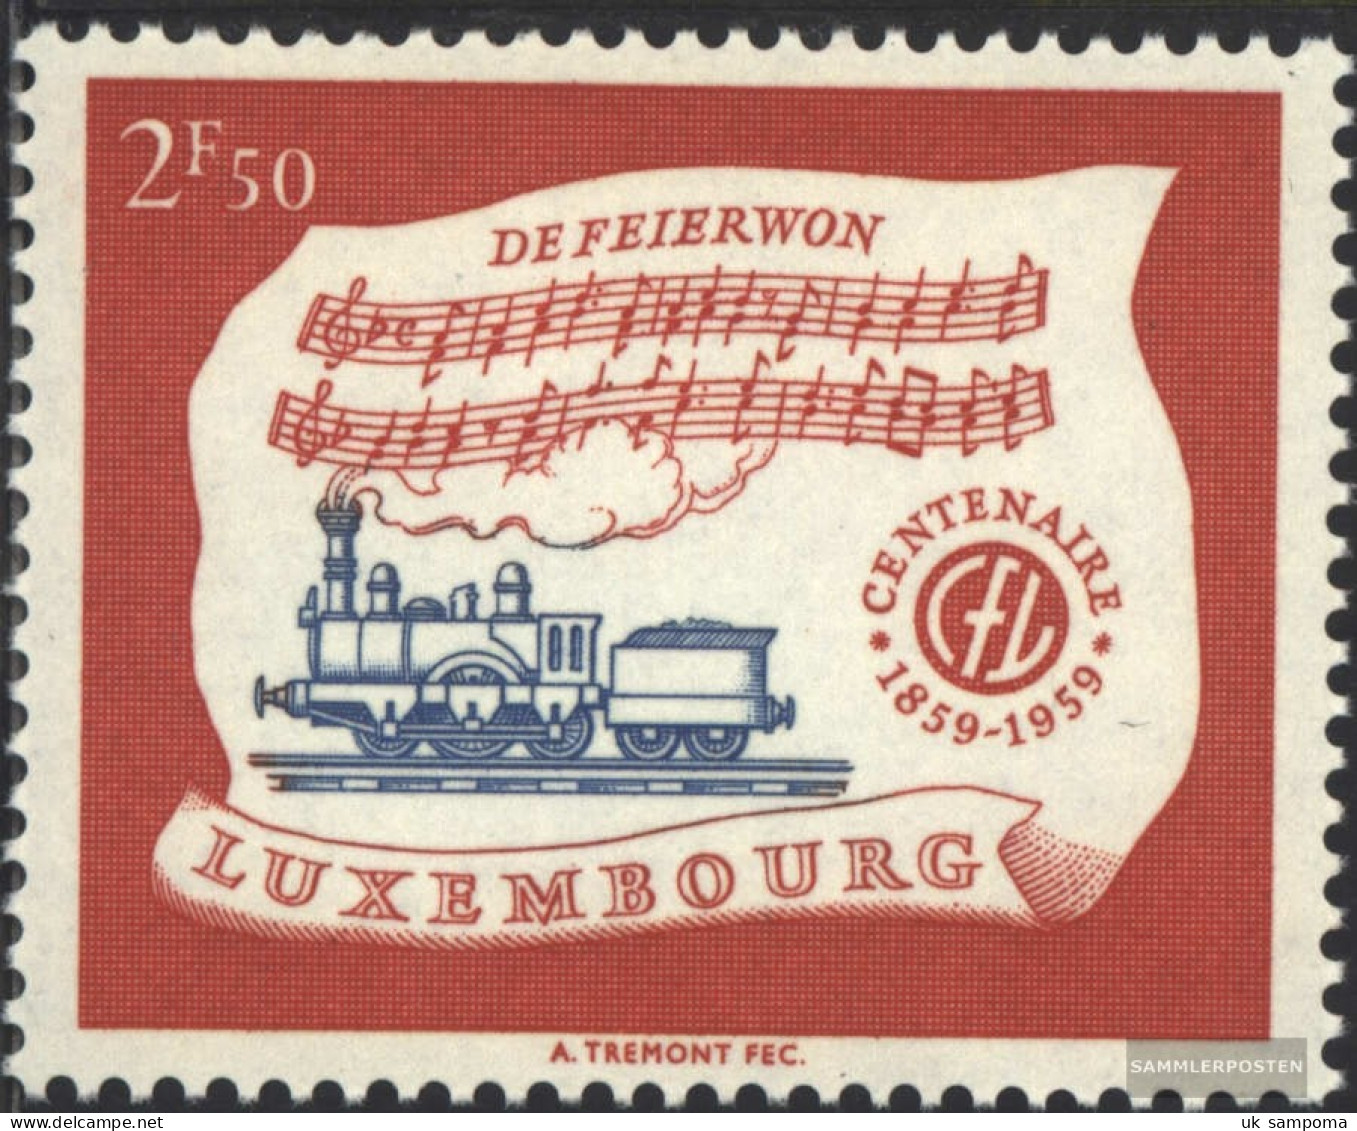 Luxembourg 611 (complete Issue) Unmounted Mint / Never Hinged 1959 Railway - The Feuerwagen - Neufs